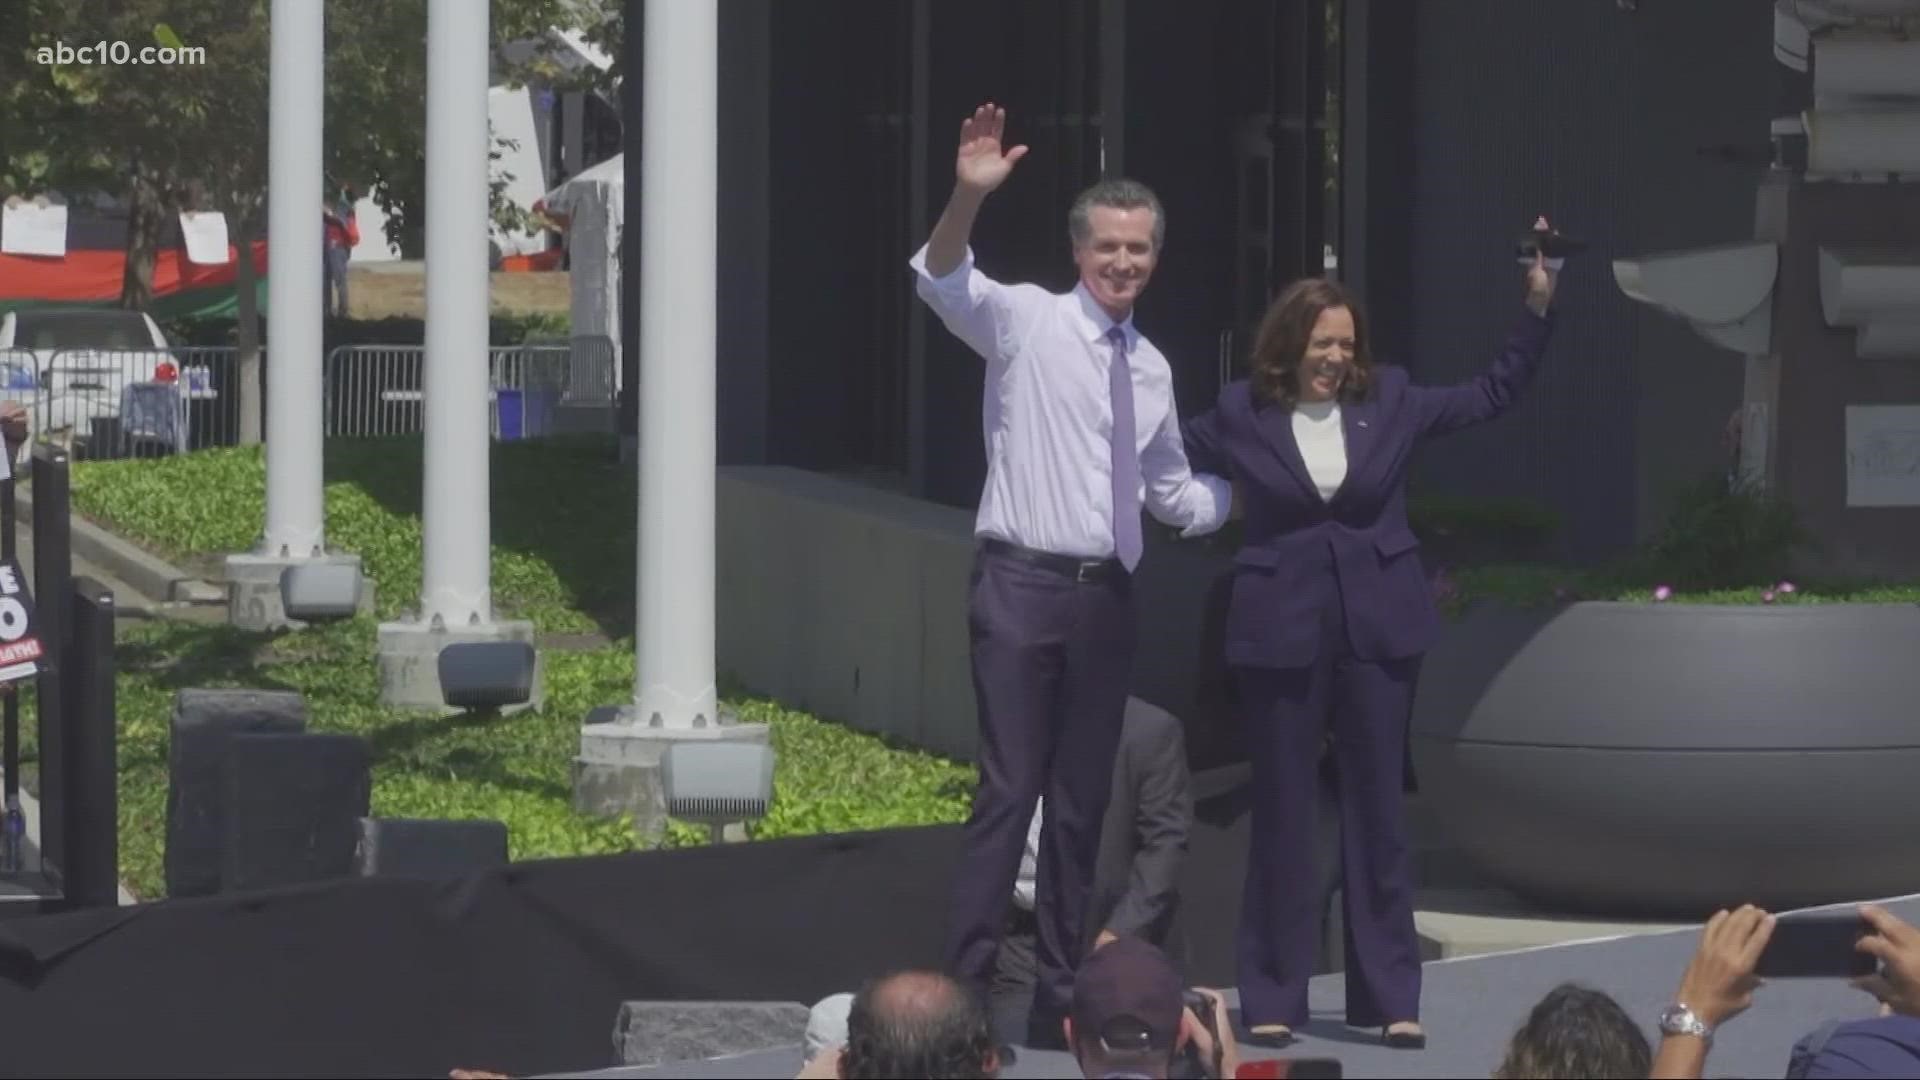 Vice President Harris campaigned with Gov. Newsom in the Bay Area Wednesday, President Biden expected next week for final push.